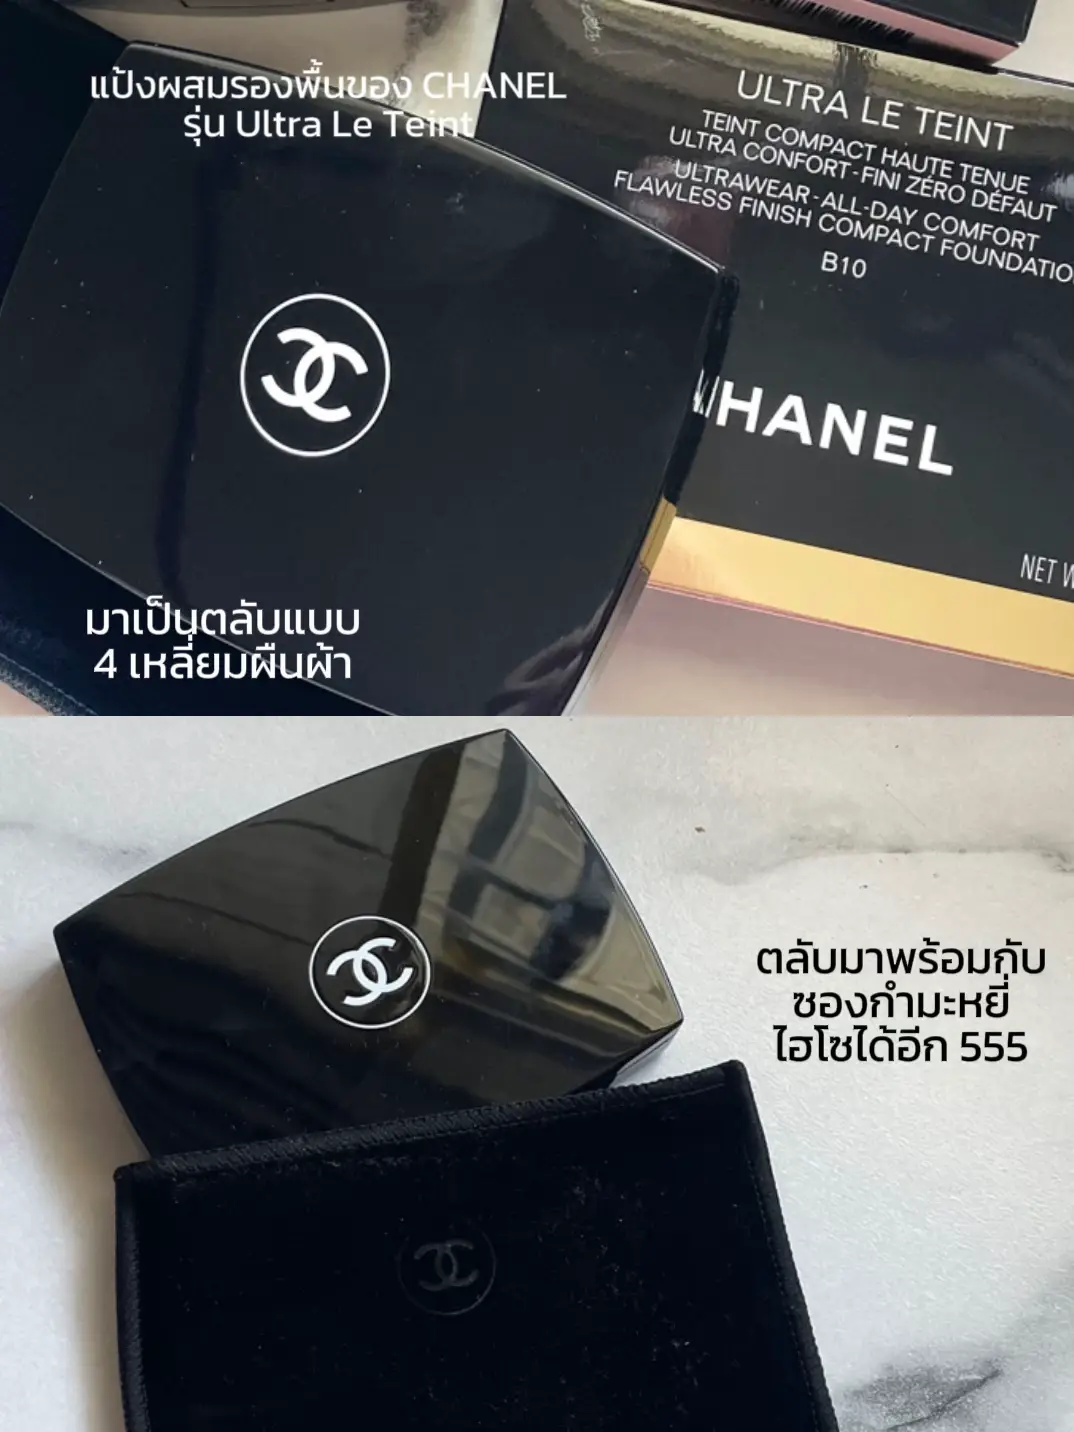 chanel compact foundation